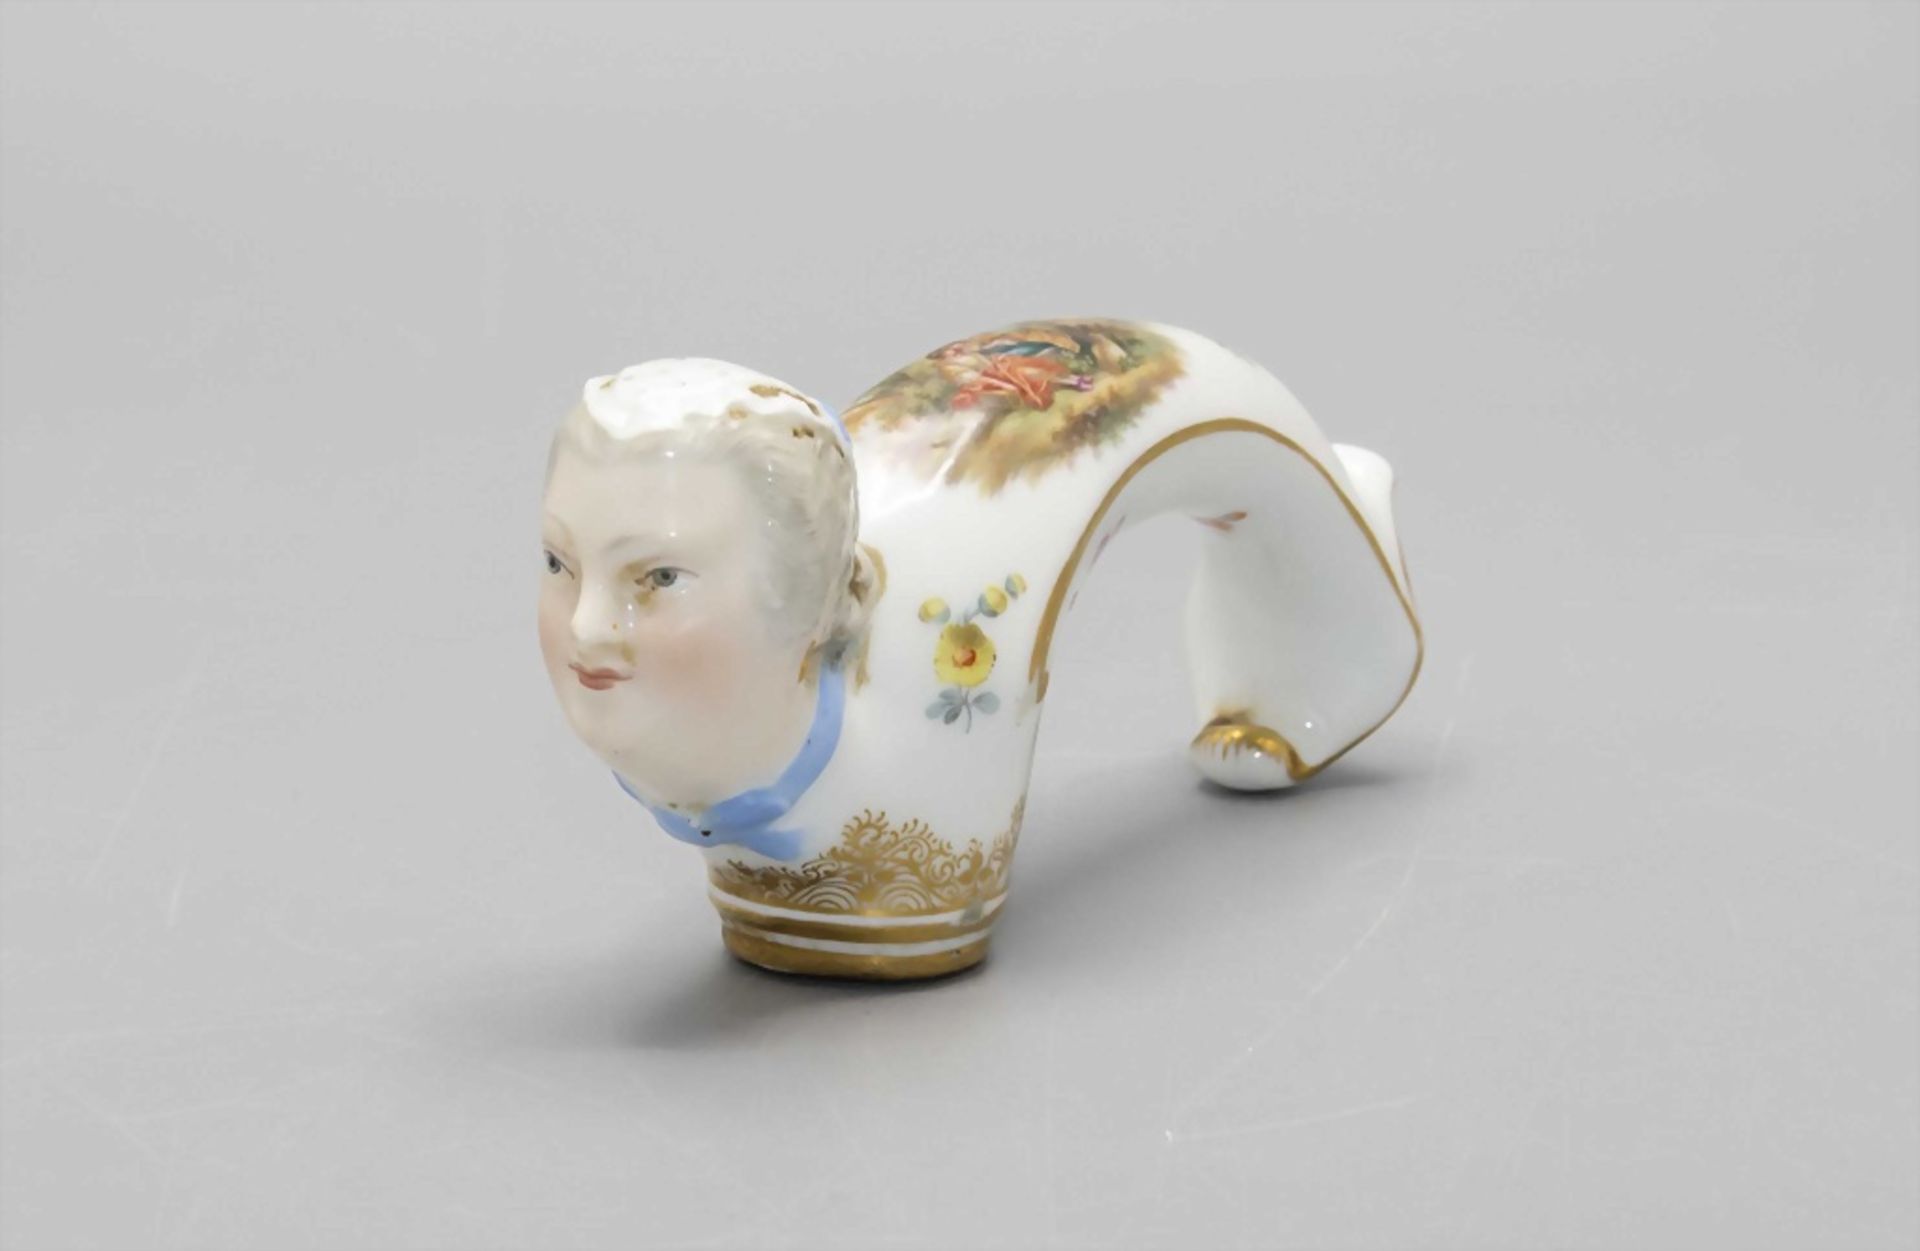 Stockgriff mit Frauenkopf und Watteau-Szene / A cane handle with the head of a woman and a ... - Bild 2 aus 6